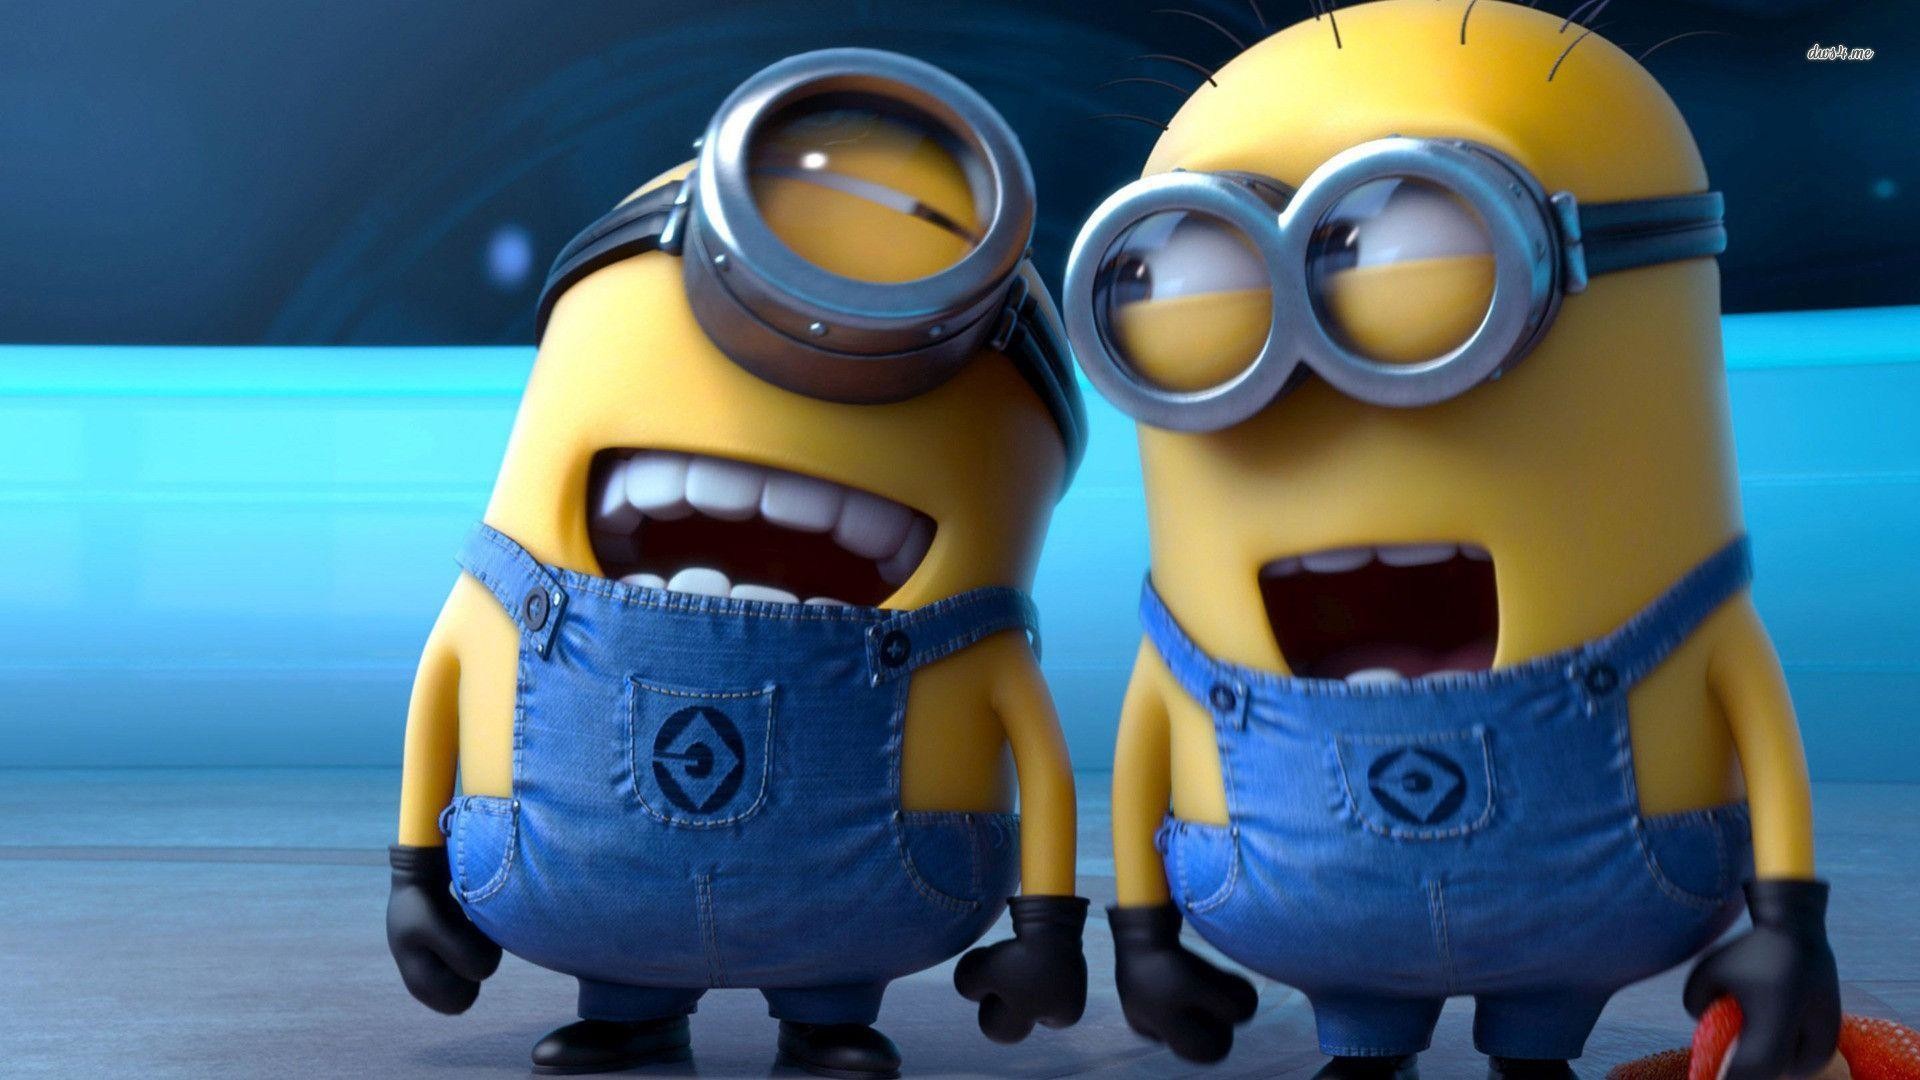 1920x1080 Despicable Me 2 Laughing Minions wallpaper - Cartoon wallpapers - #